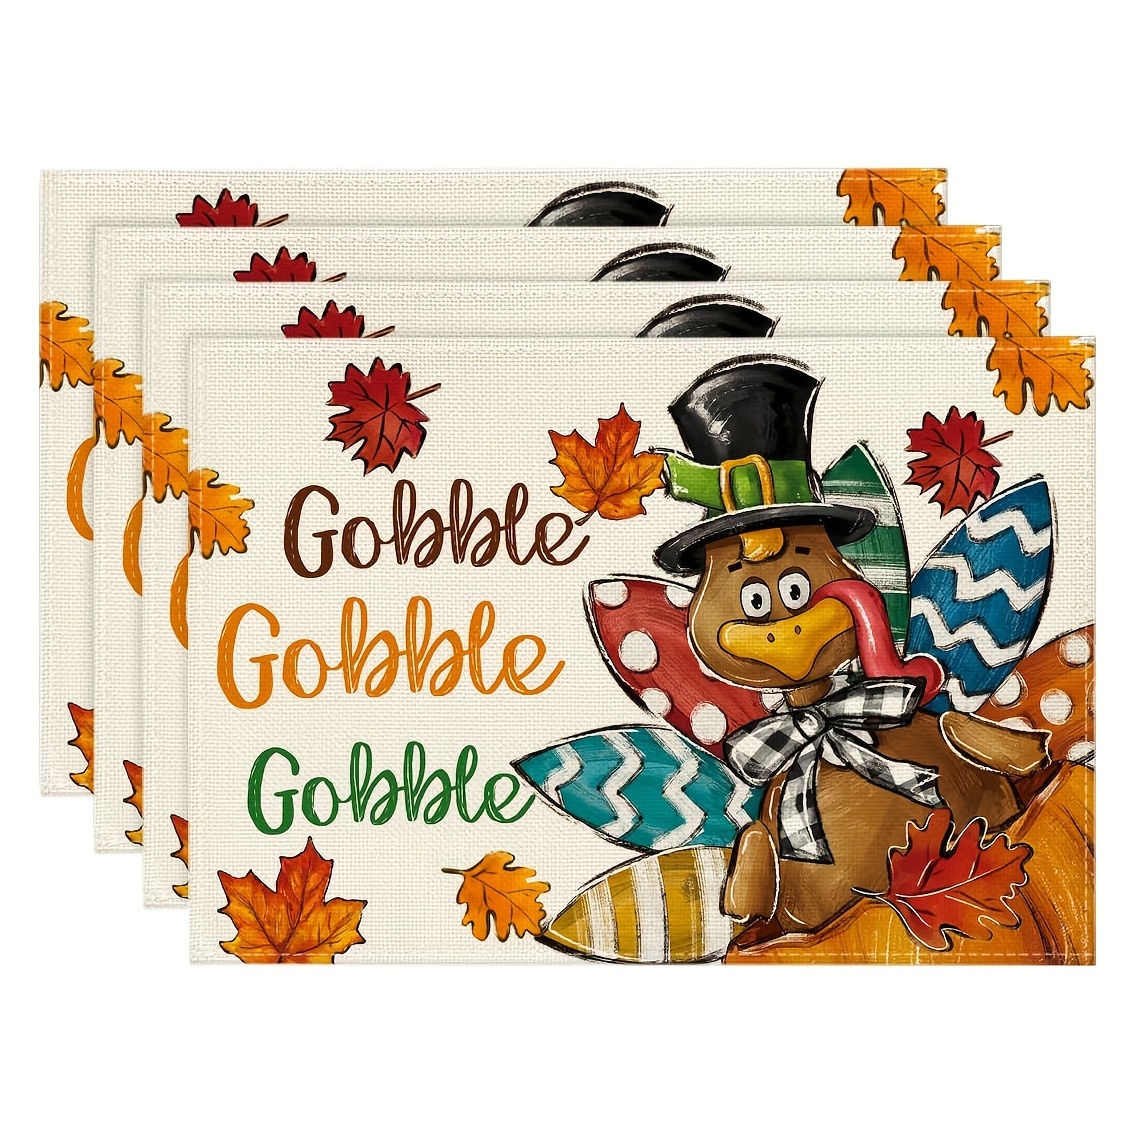 

4-piece Set Of Thanksgiving Placemats - Turkey & Maple Leaf Design, 12x18 Inch, Polyester, Square, Machine Washable - Perfect For Fall Harvest Parties & Kitchen Decor